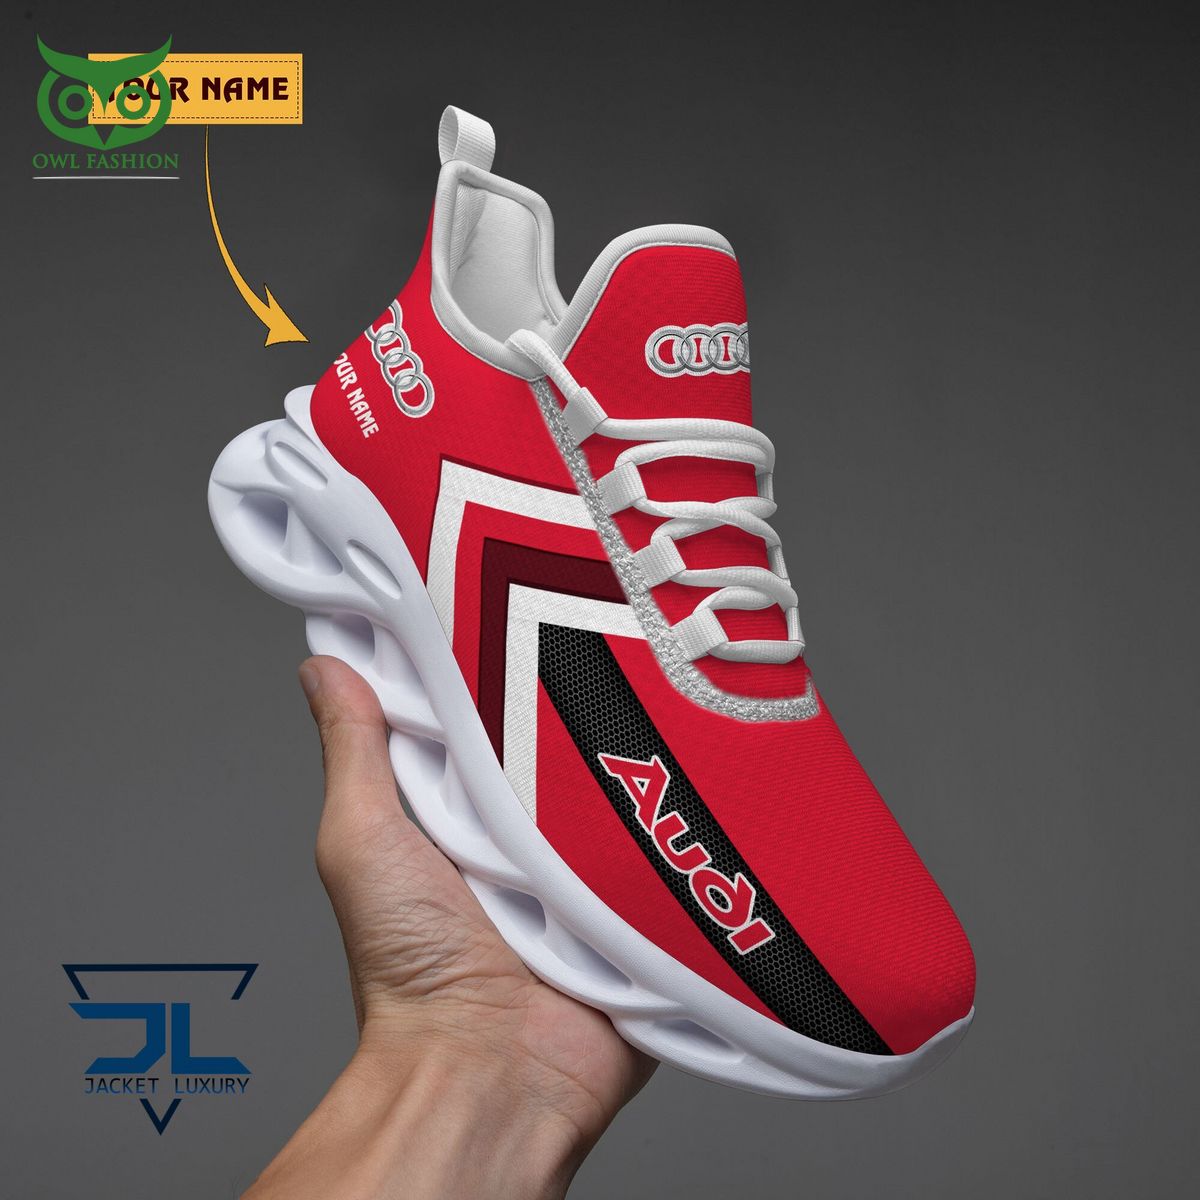 Shop Owl Fashion on X: 🔥SPECIAL🔥 ⚡Audi Car Brand Logo Customized Max  Soul Shoes⚡ ➡️Get it now:  #shopowl #shopowlfashion  #shopowlPOD #Cars #MaxSoul #sneakers Follow us for more products   / X